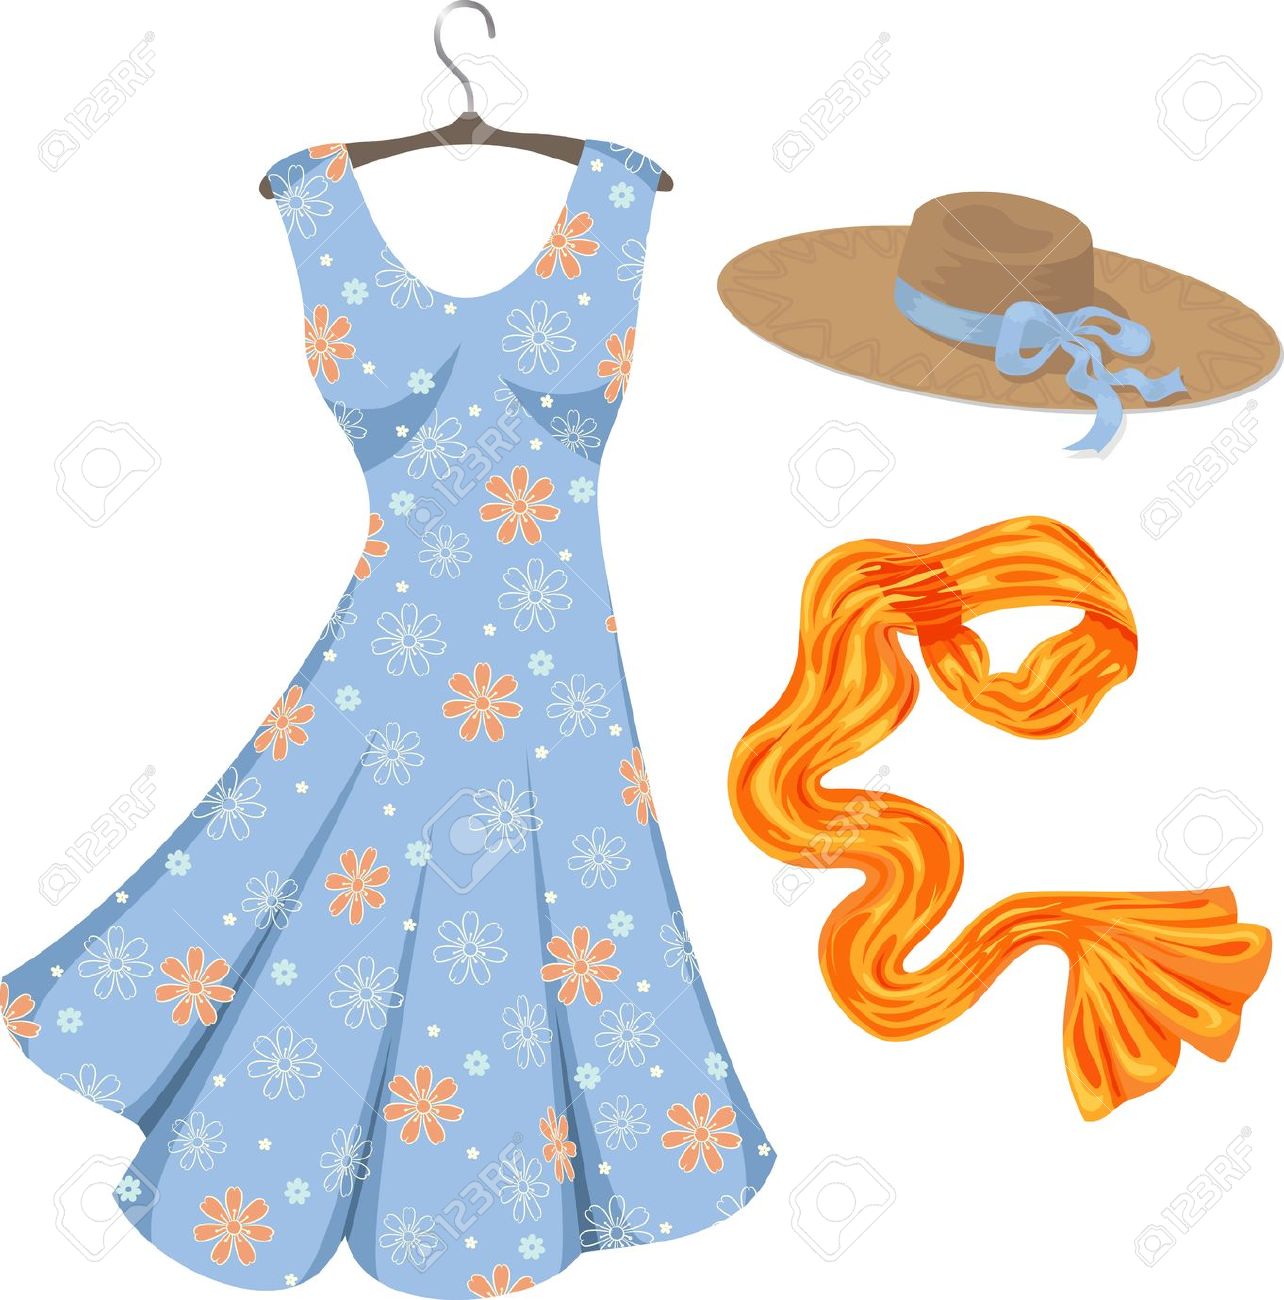 Blue Dress clipart #2, Download drawings